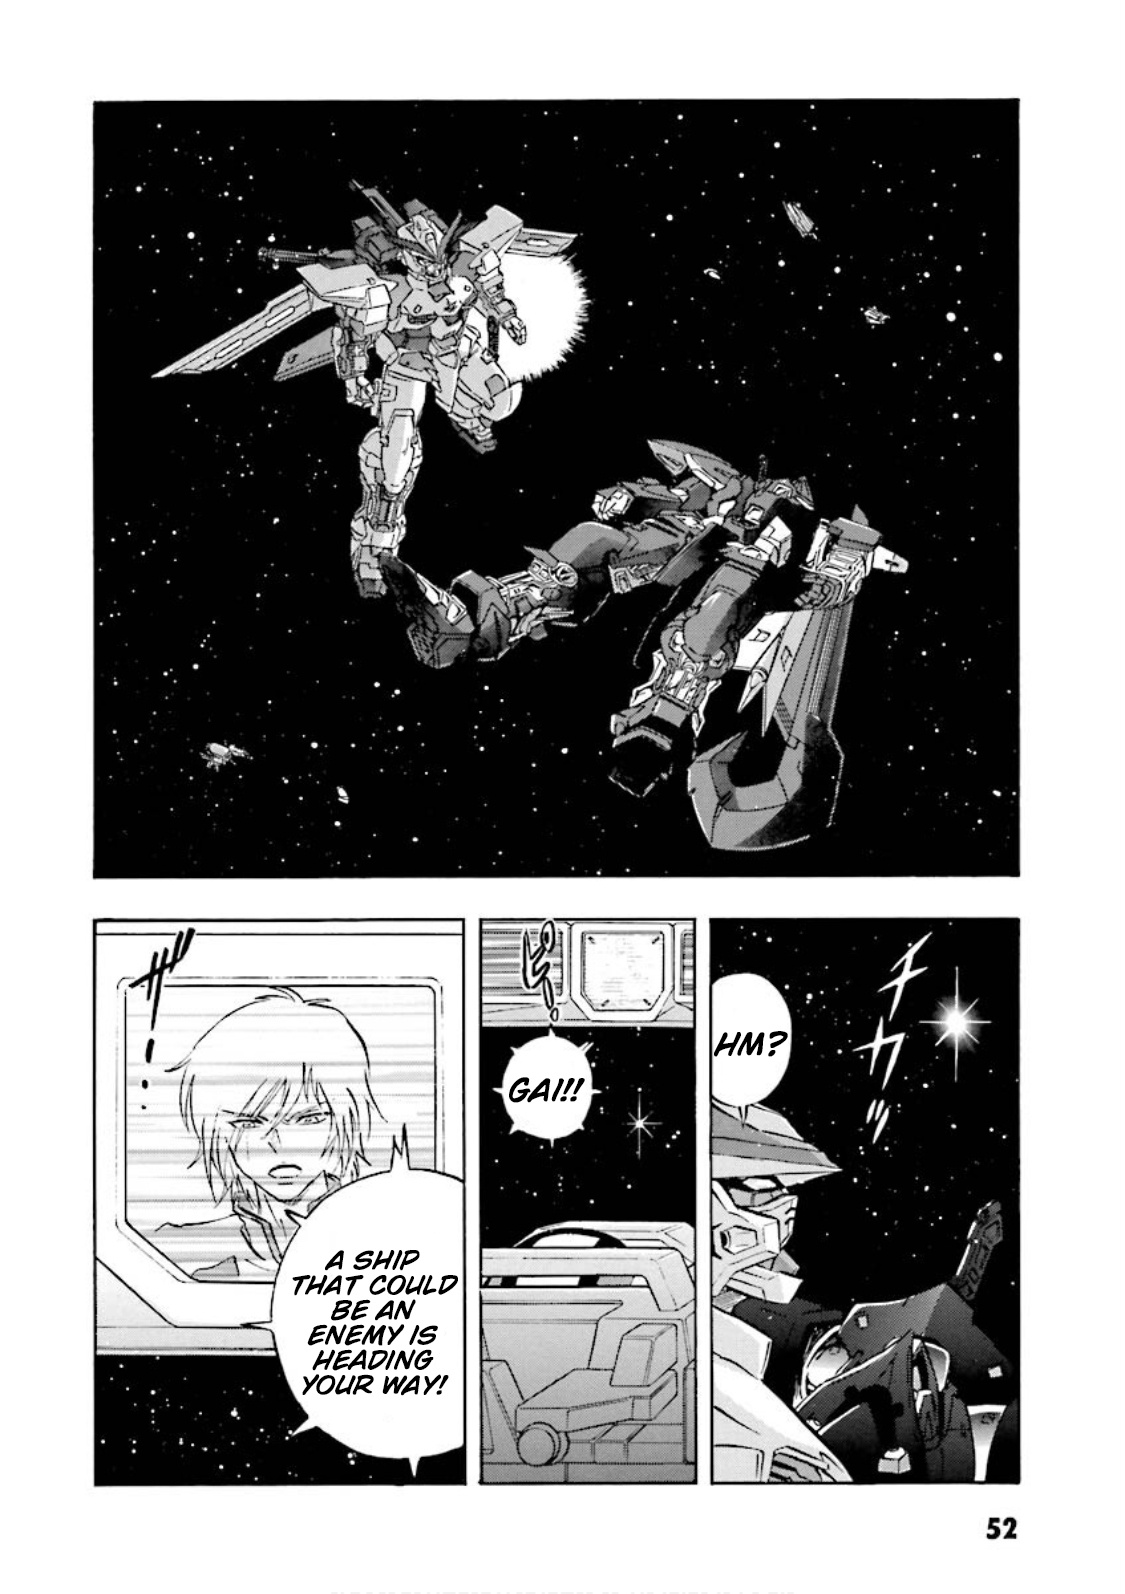 Mobile Suit Gundam Seed Astray Re:master Edition - Page 2